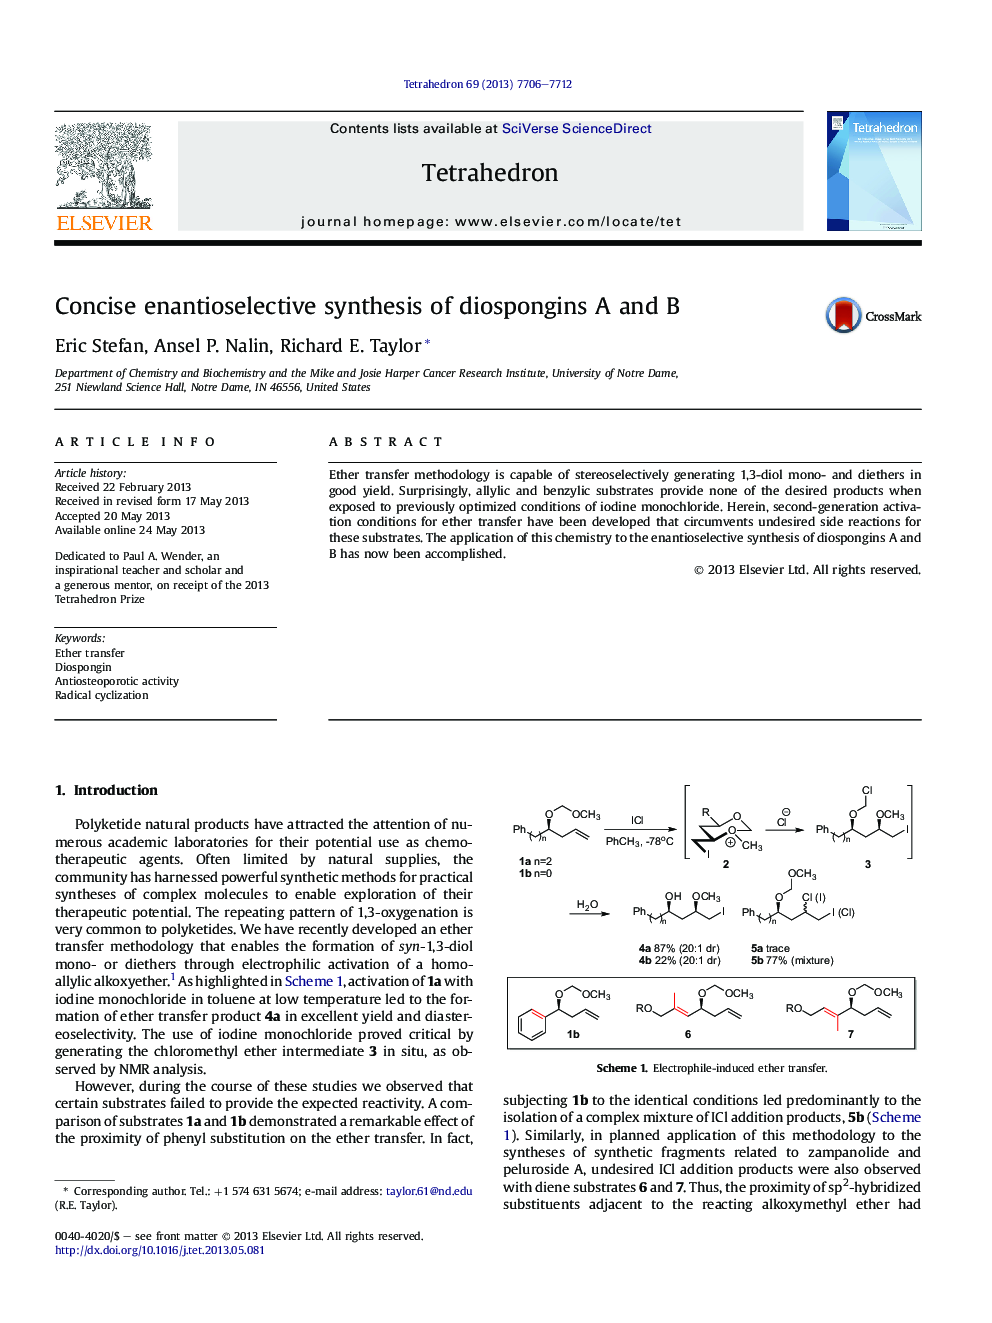 Concise enantioselective synthesis of diospongins A and B